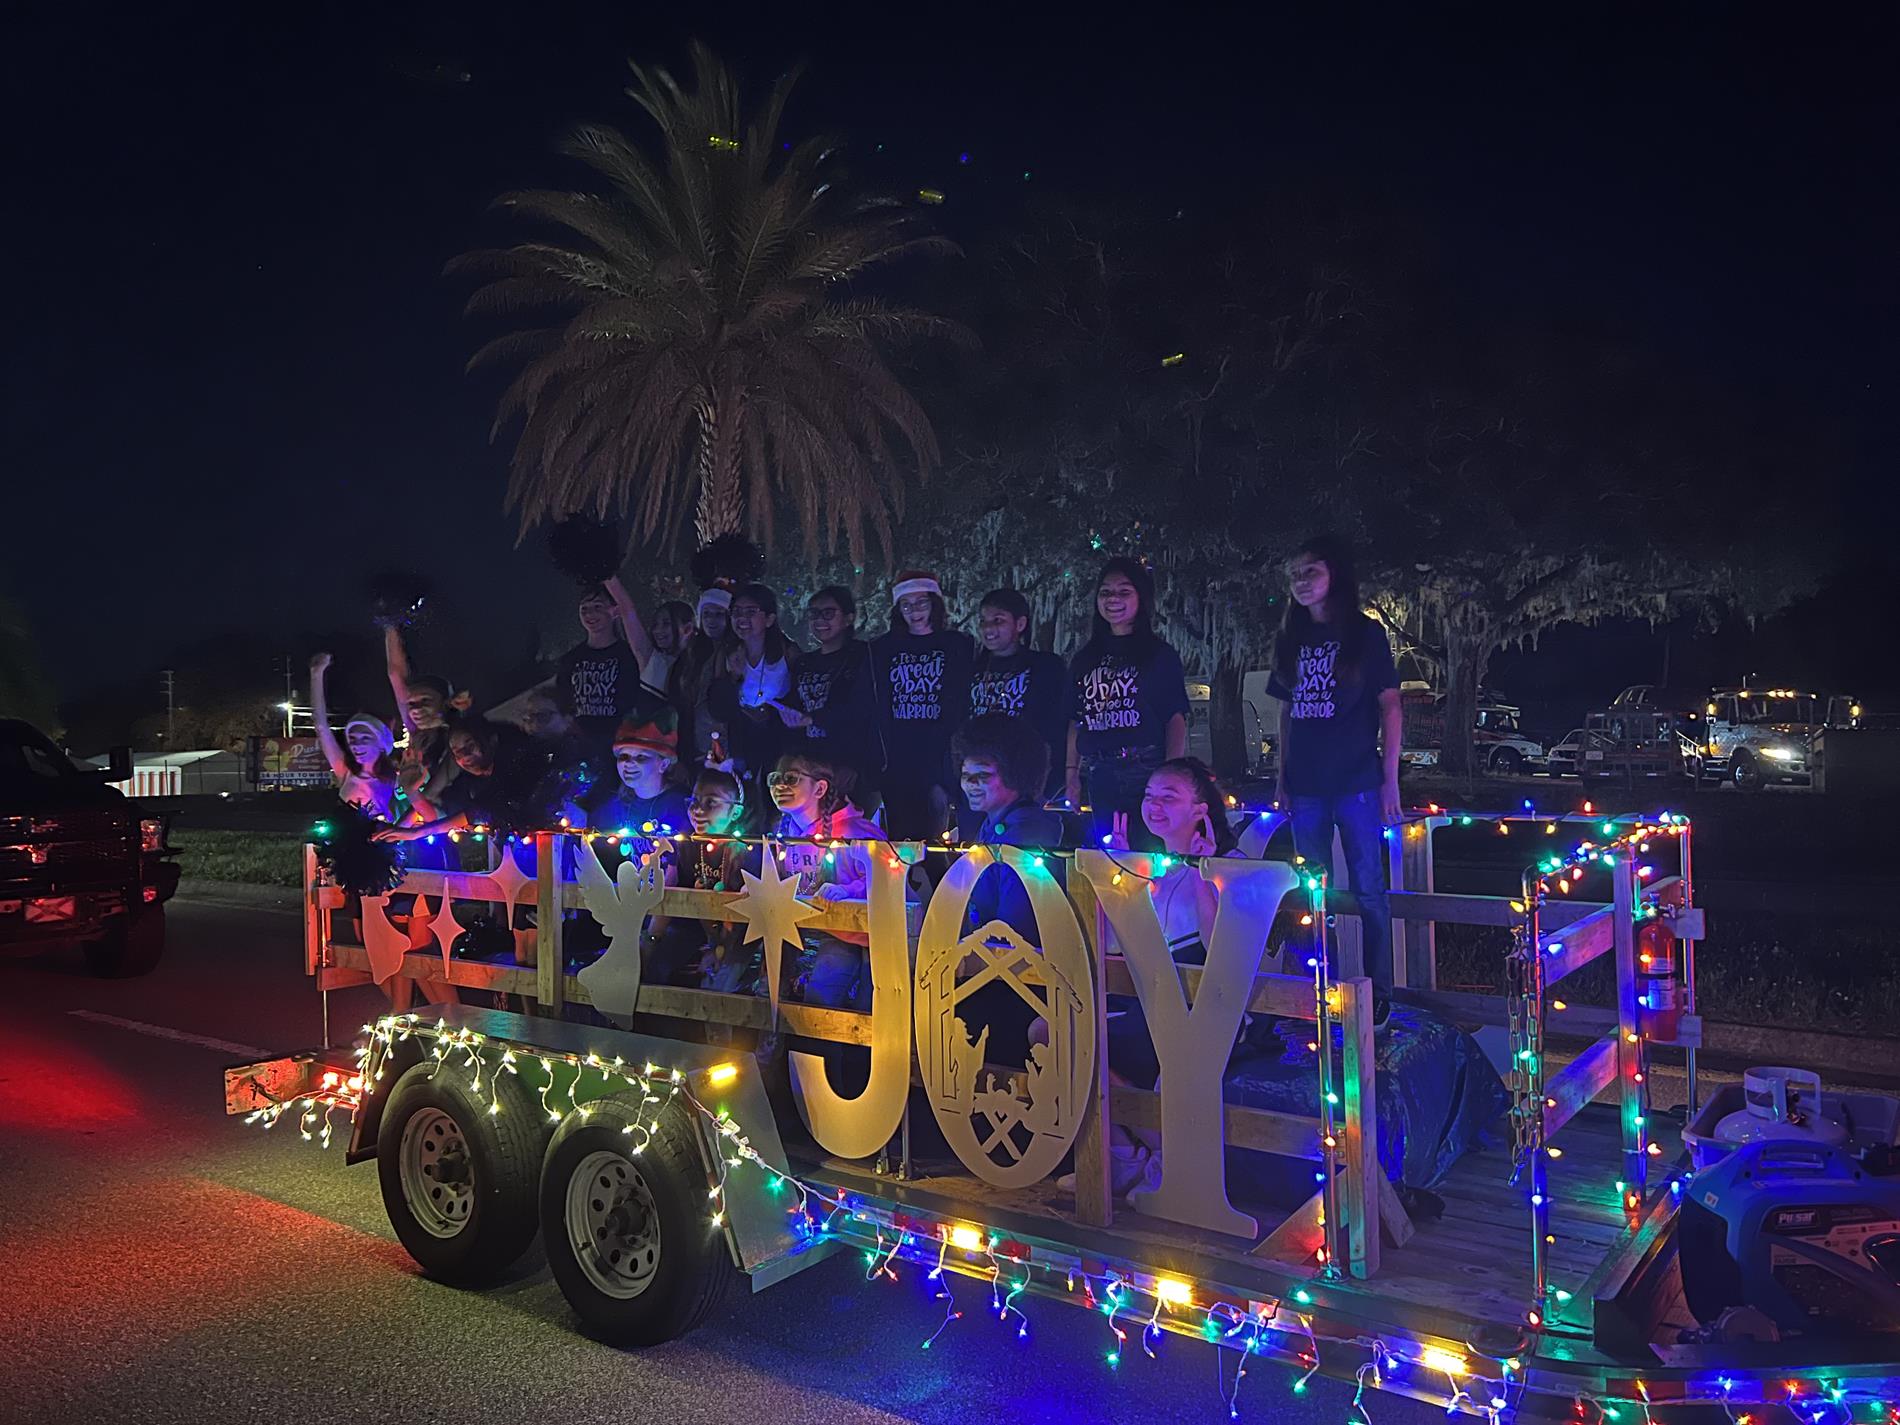 Students on Christmas Float